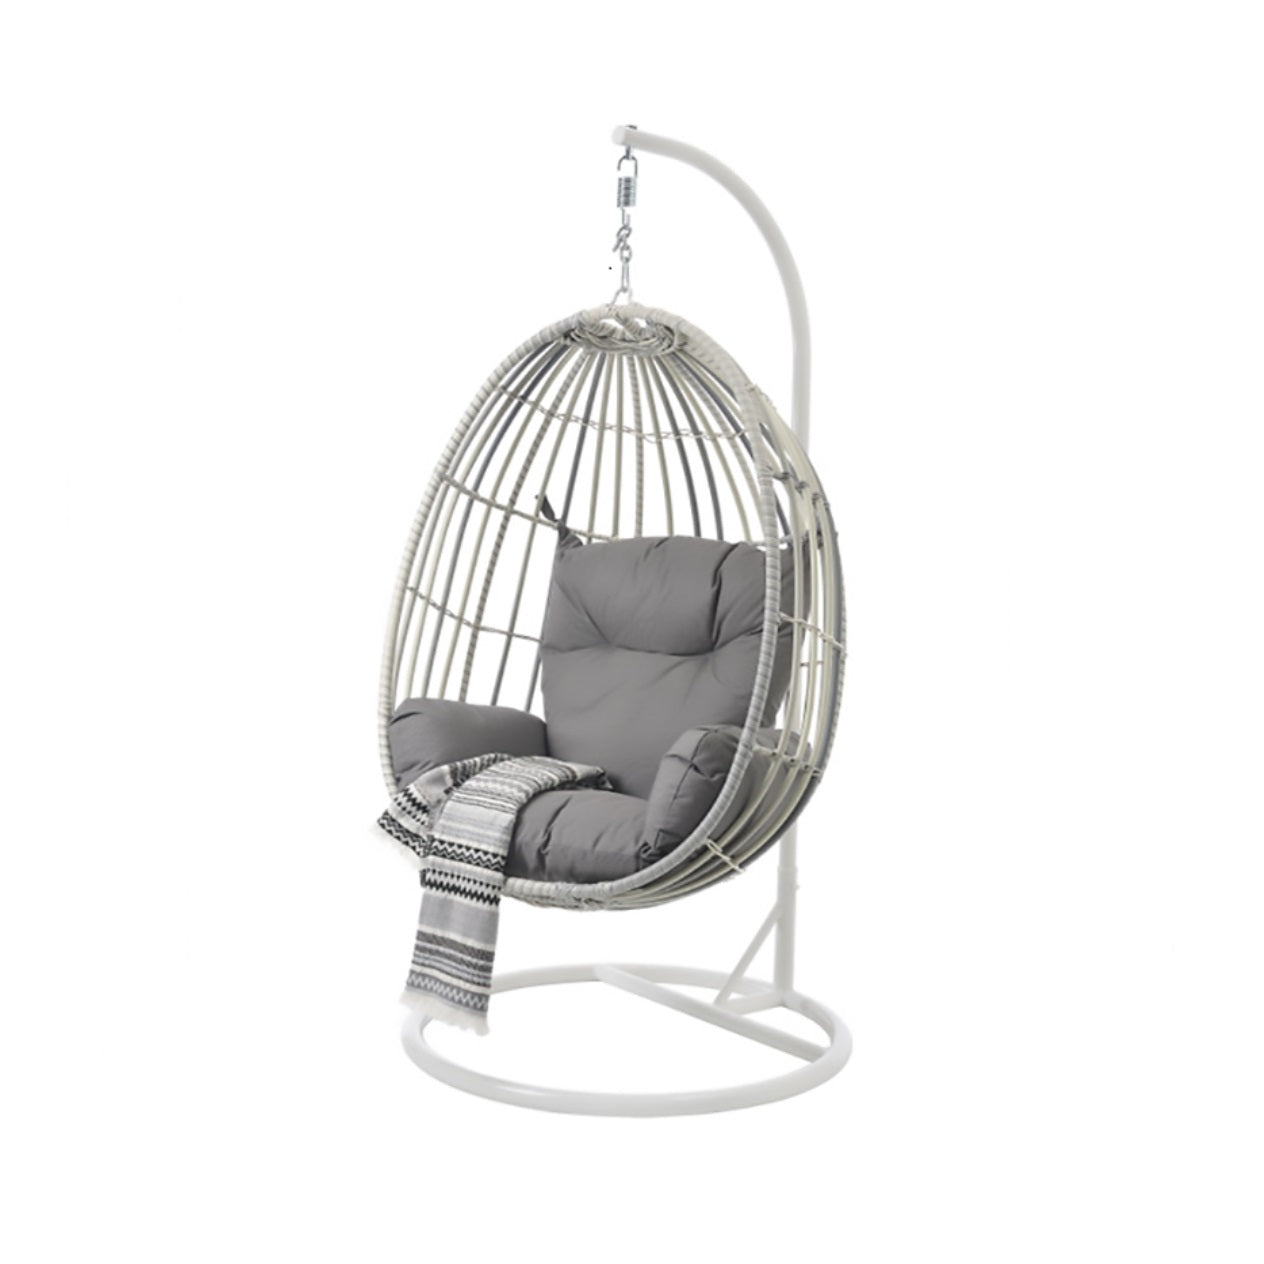 The Kannis Hanging Chair featuring a sleek white metal frame and woven details, complete with cozy gray cushions and a patterned throw blanket, suspended from a curved stand.